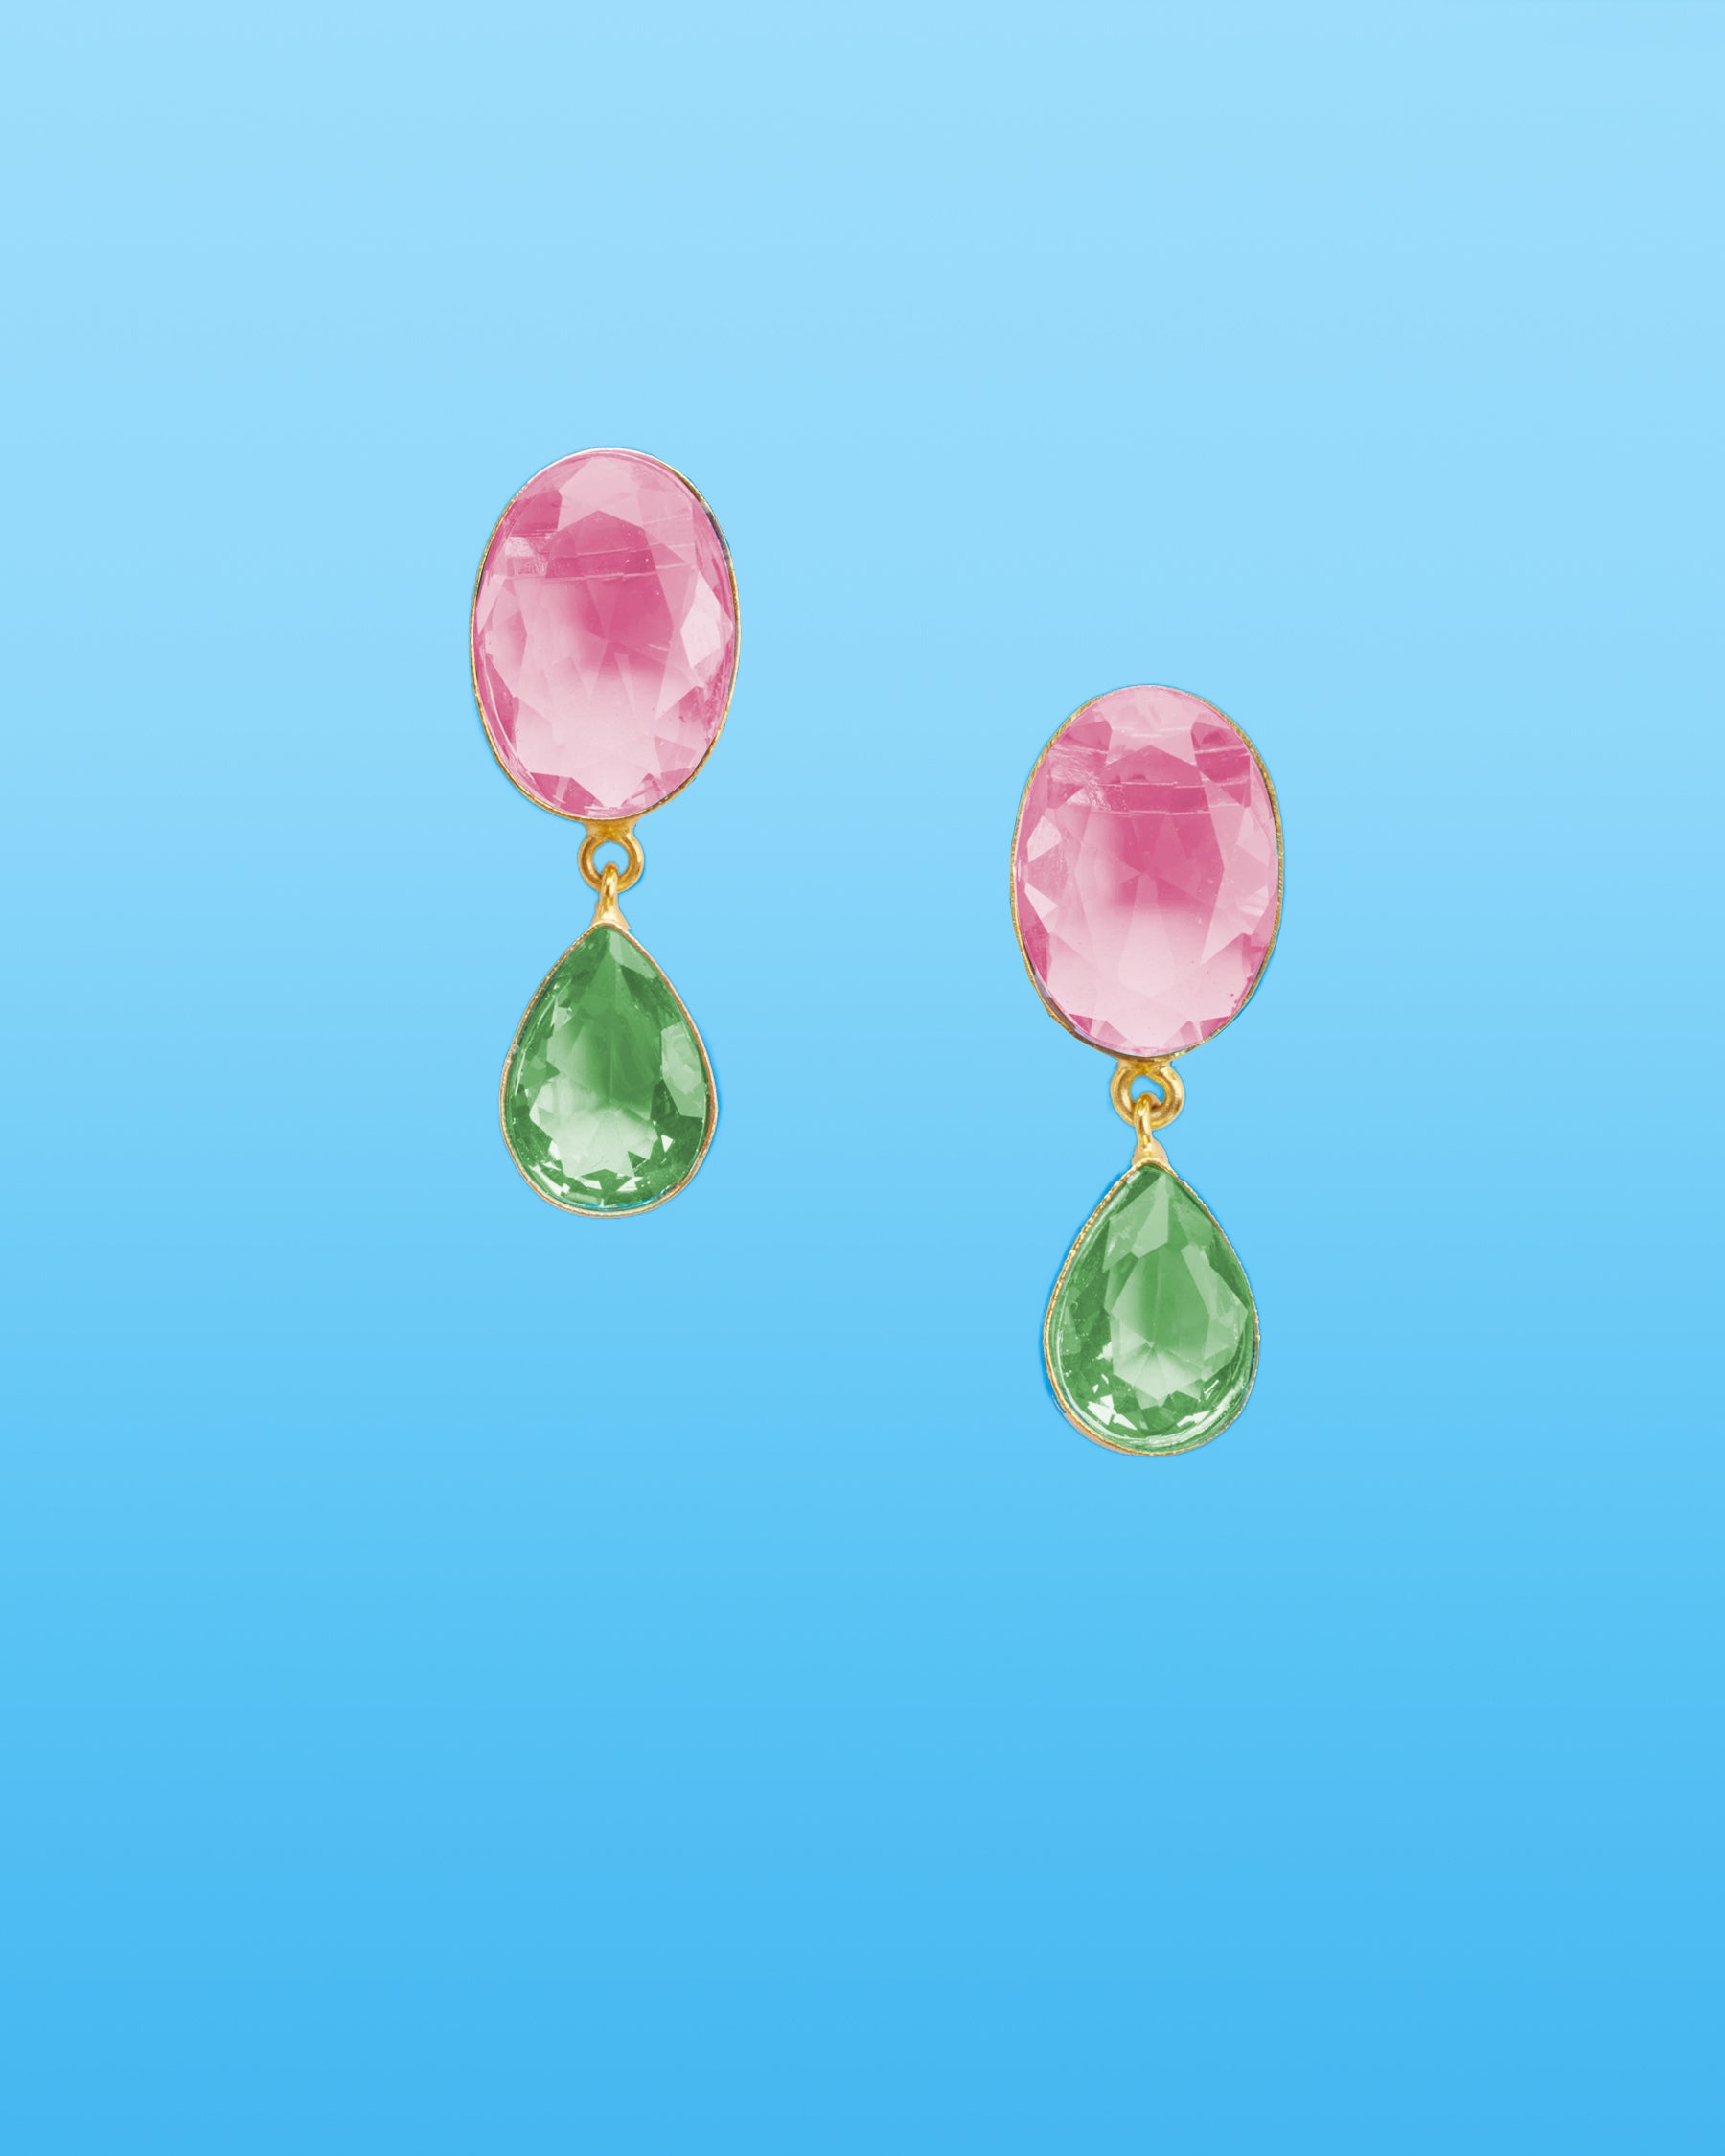 Chiara Dewdrop Earrings in Blush Pink and Mint Green